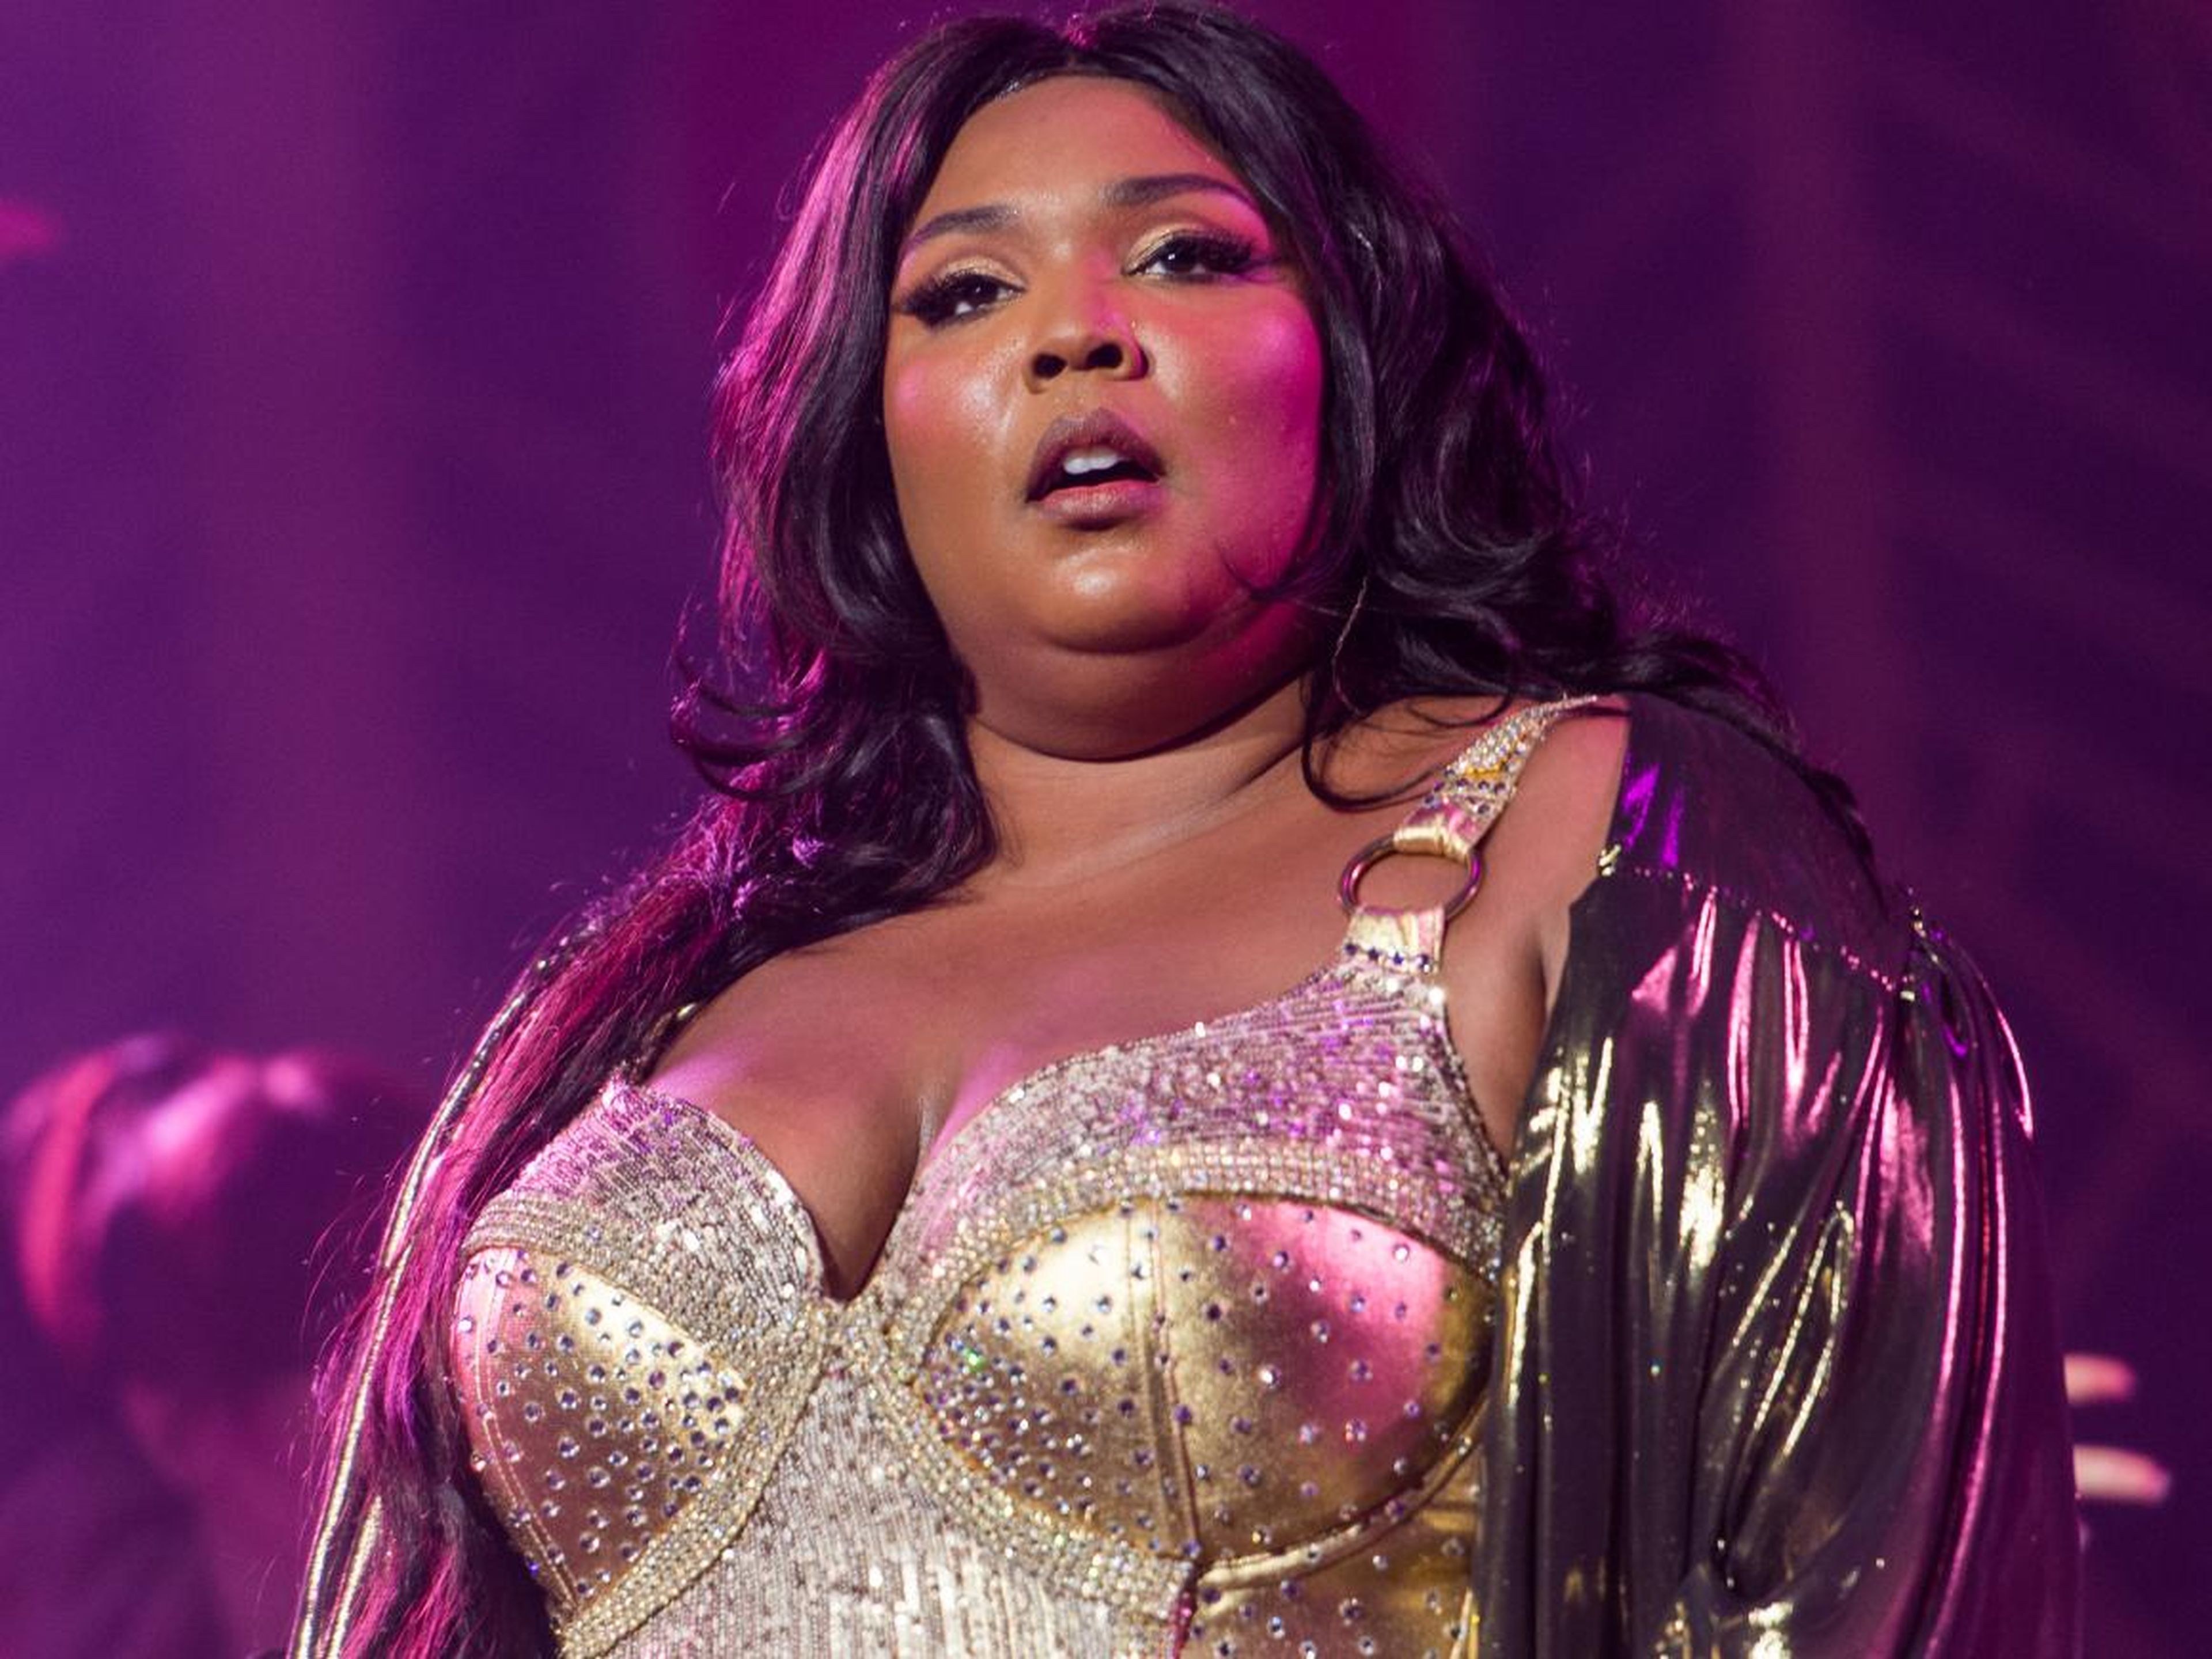 Lizzo's "Truth Hurts" won best pop solo performance.